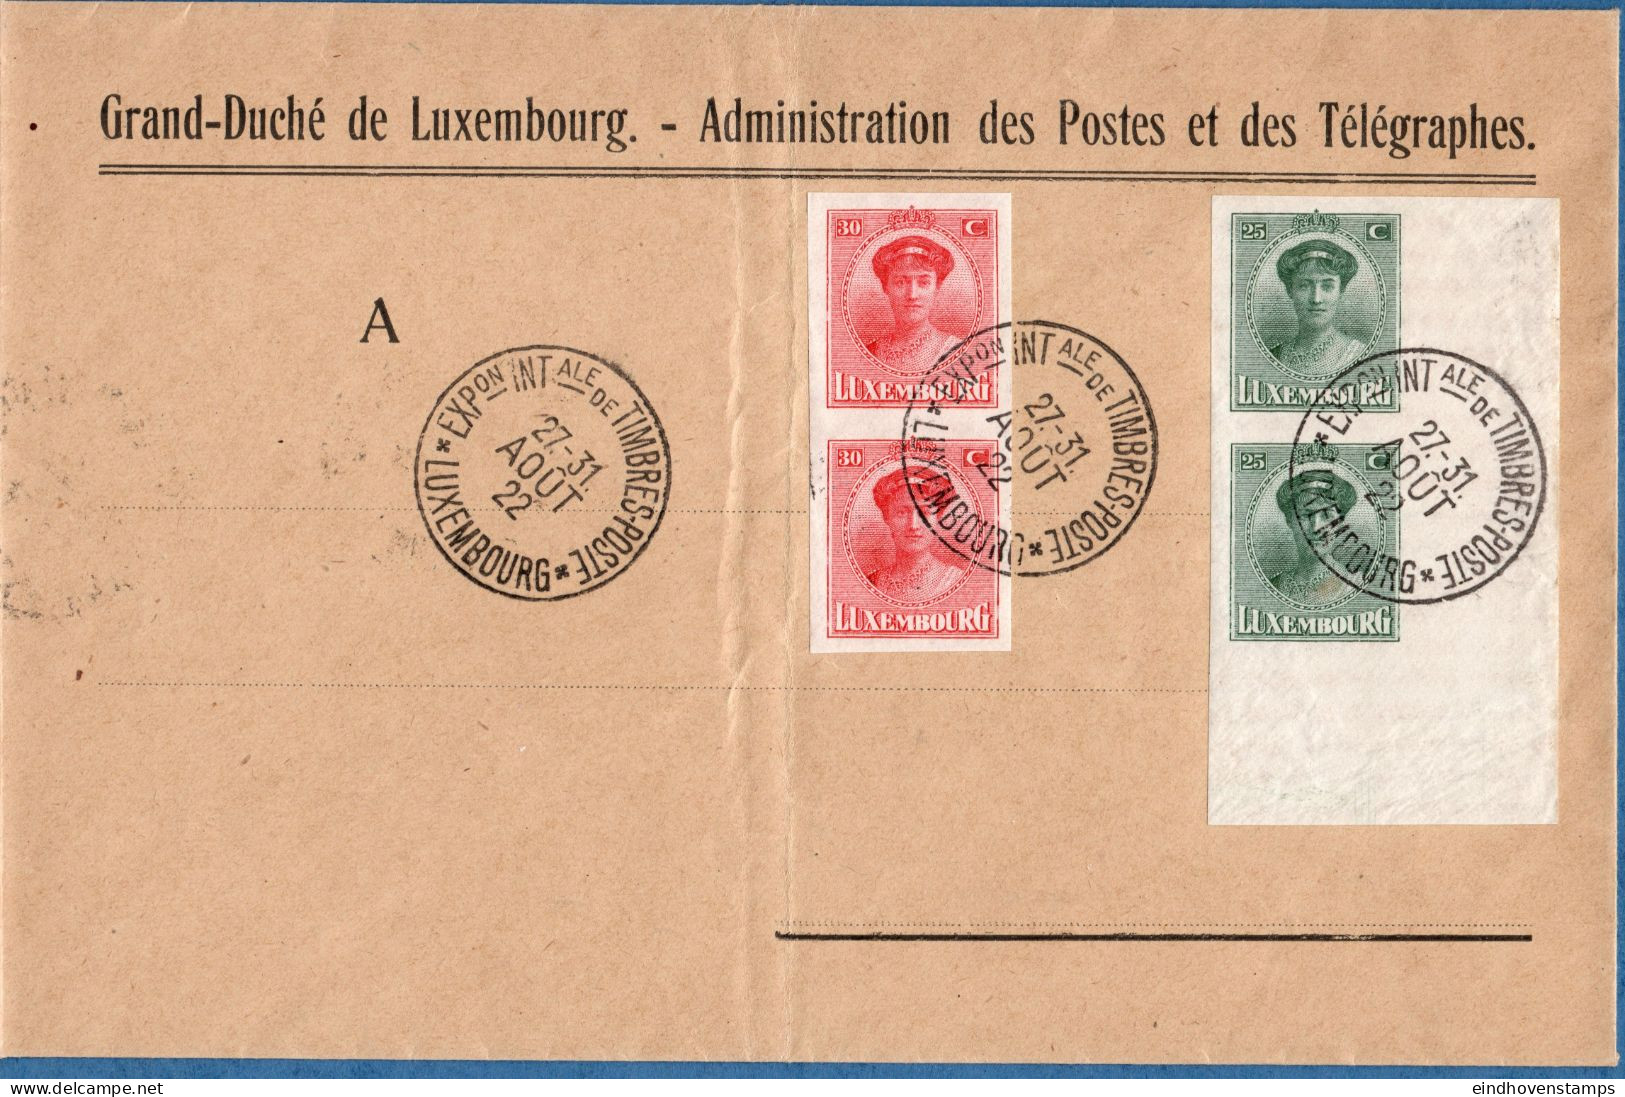 Luxemburg 1922 Exhibition Staps 2  Imperforated Pairs Cancelled On Official Cover - 25 C Sheet Cornerpair - Philatelic Exhibitions